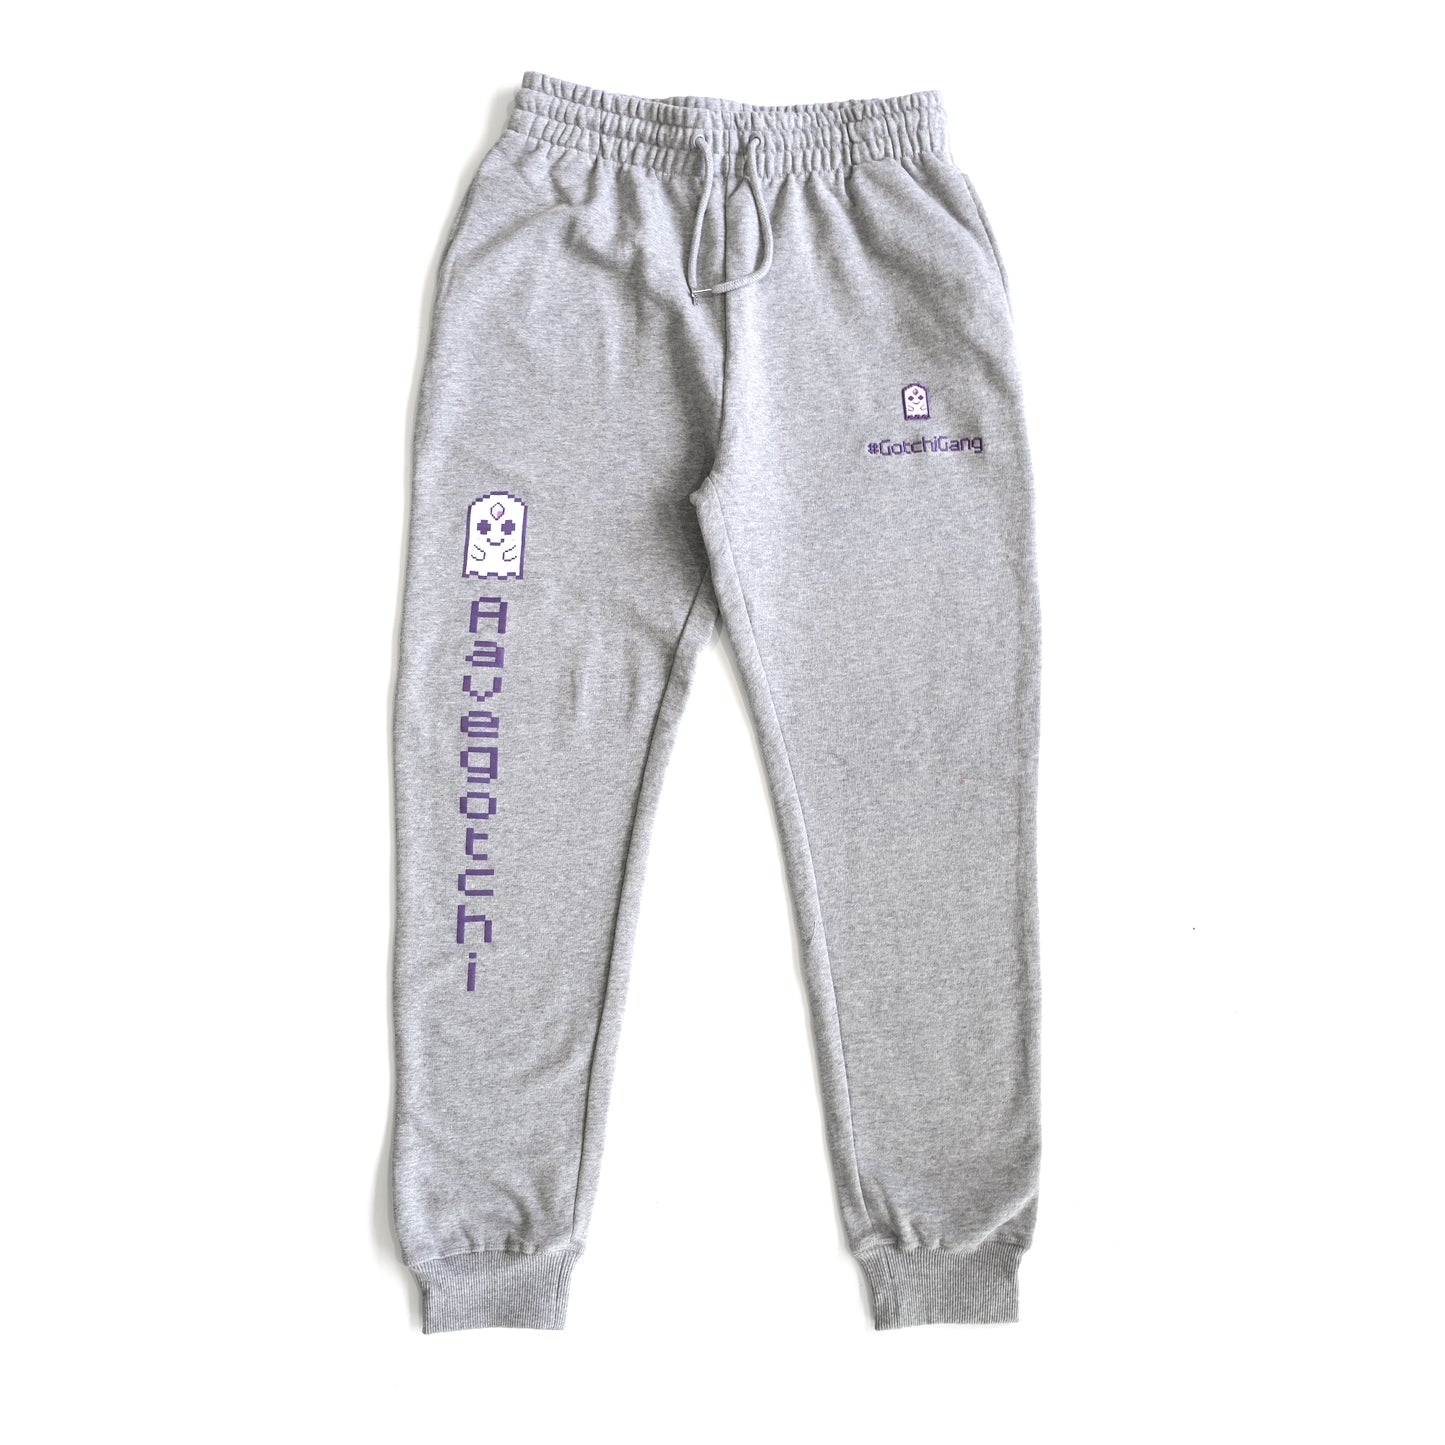 #GotchiGang Joggers - Athletic Heather